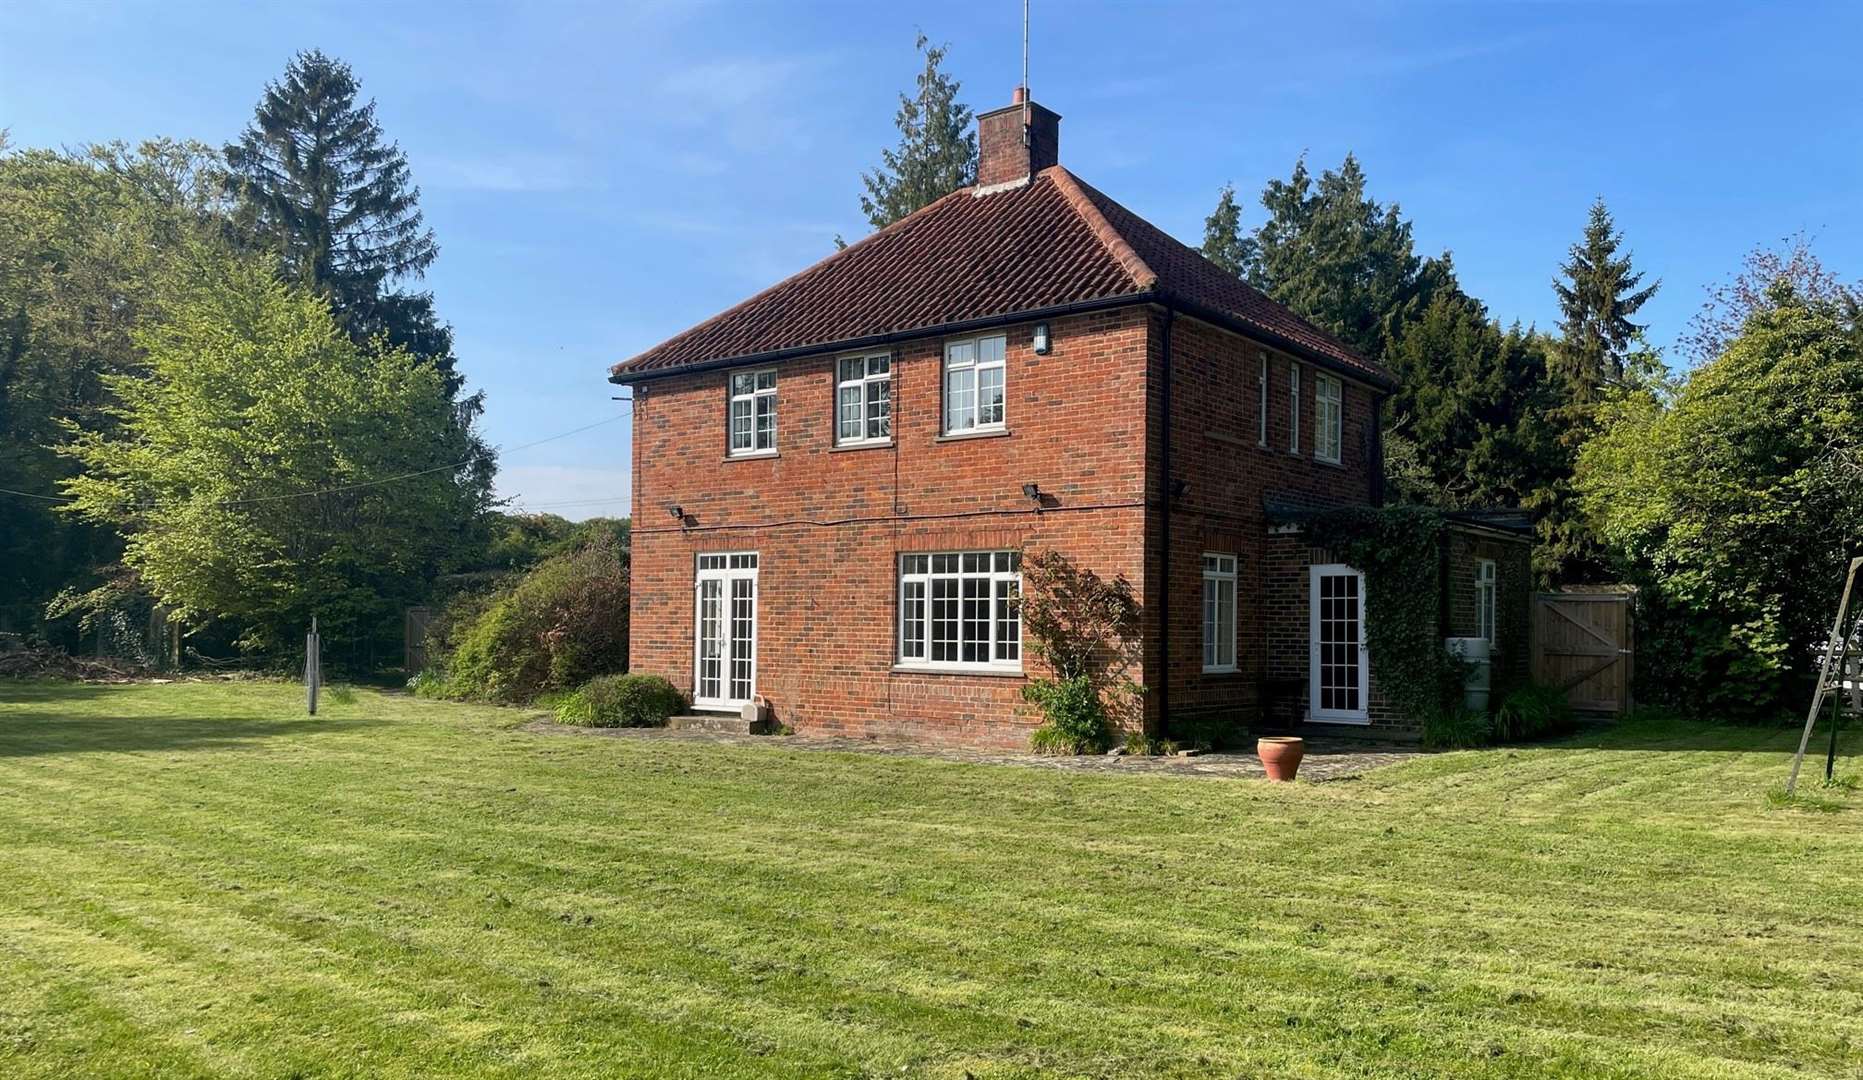 The Rectory requires improvement and redecoration and lies on the outskirts of the village of Harrietsham, a short drive to Junction 8 of the M20 (the Leeds Castle junction).